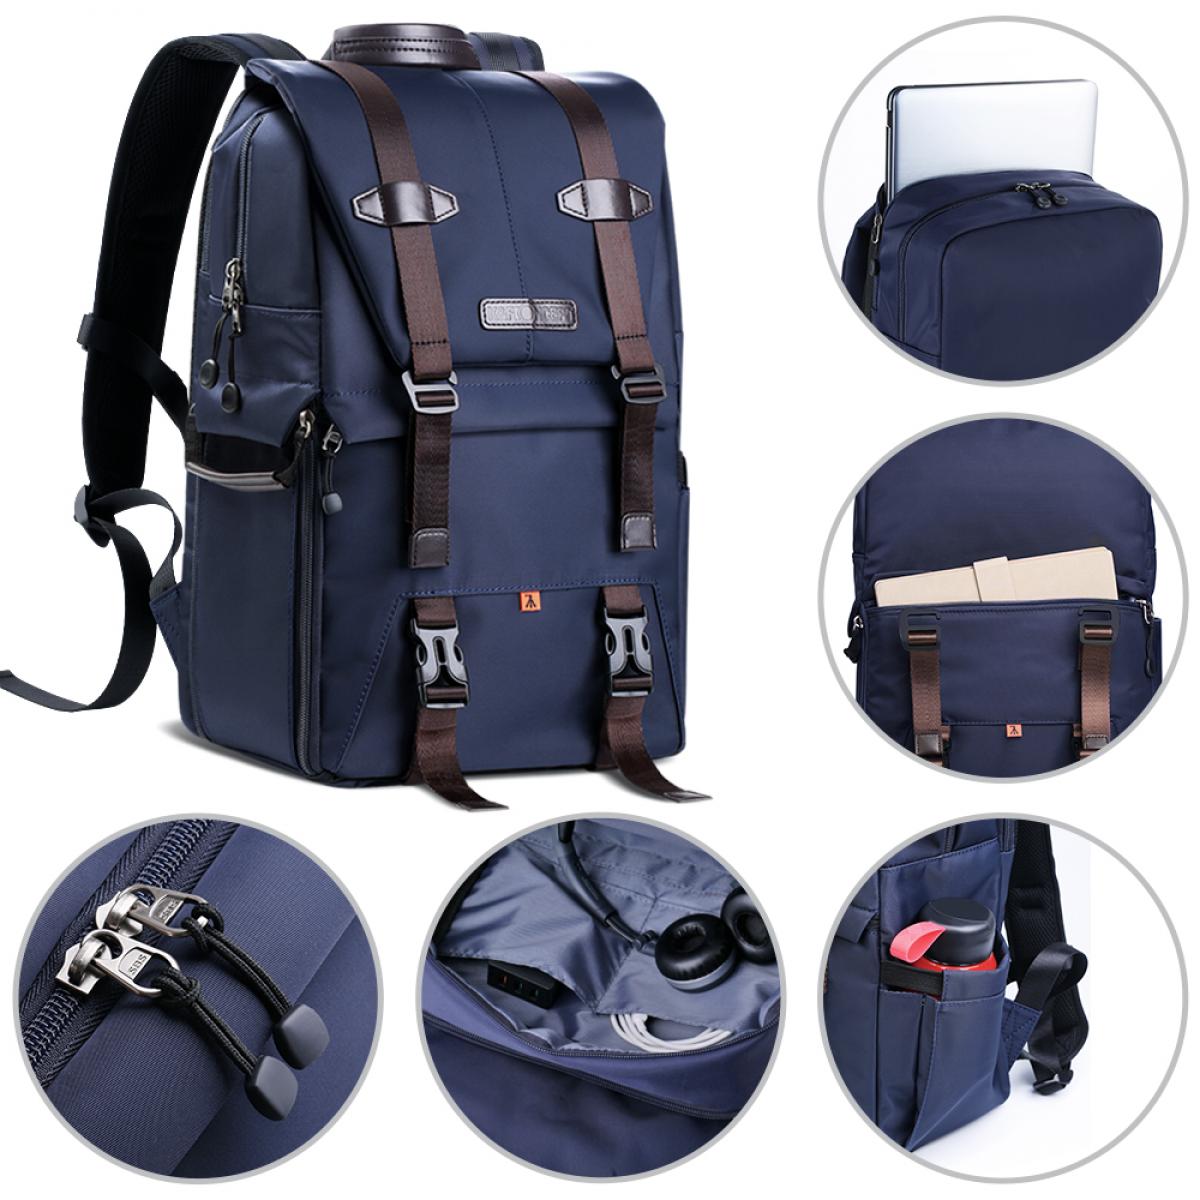 Multifunctional DSLR Camera Travel Backpack for Outdoor Photography ...